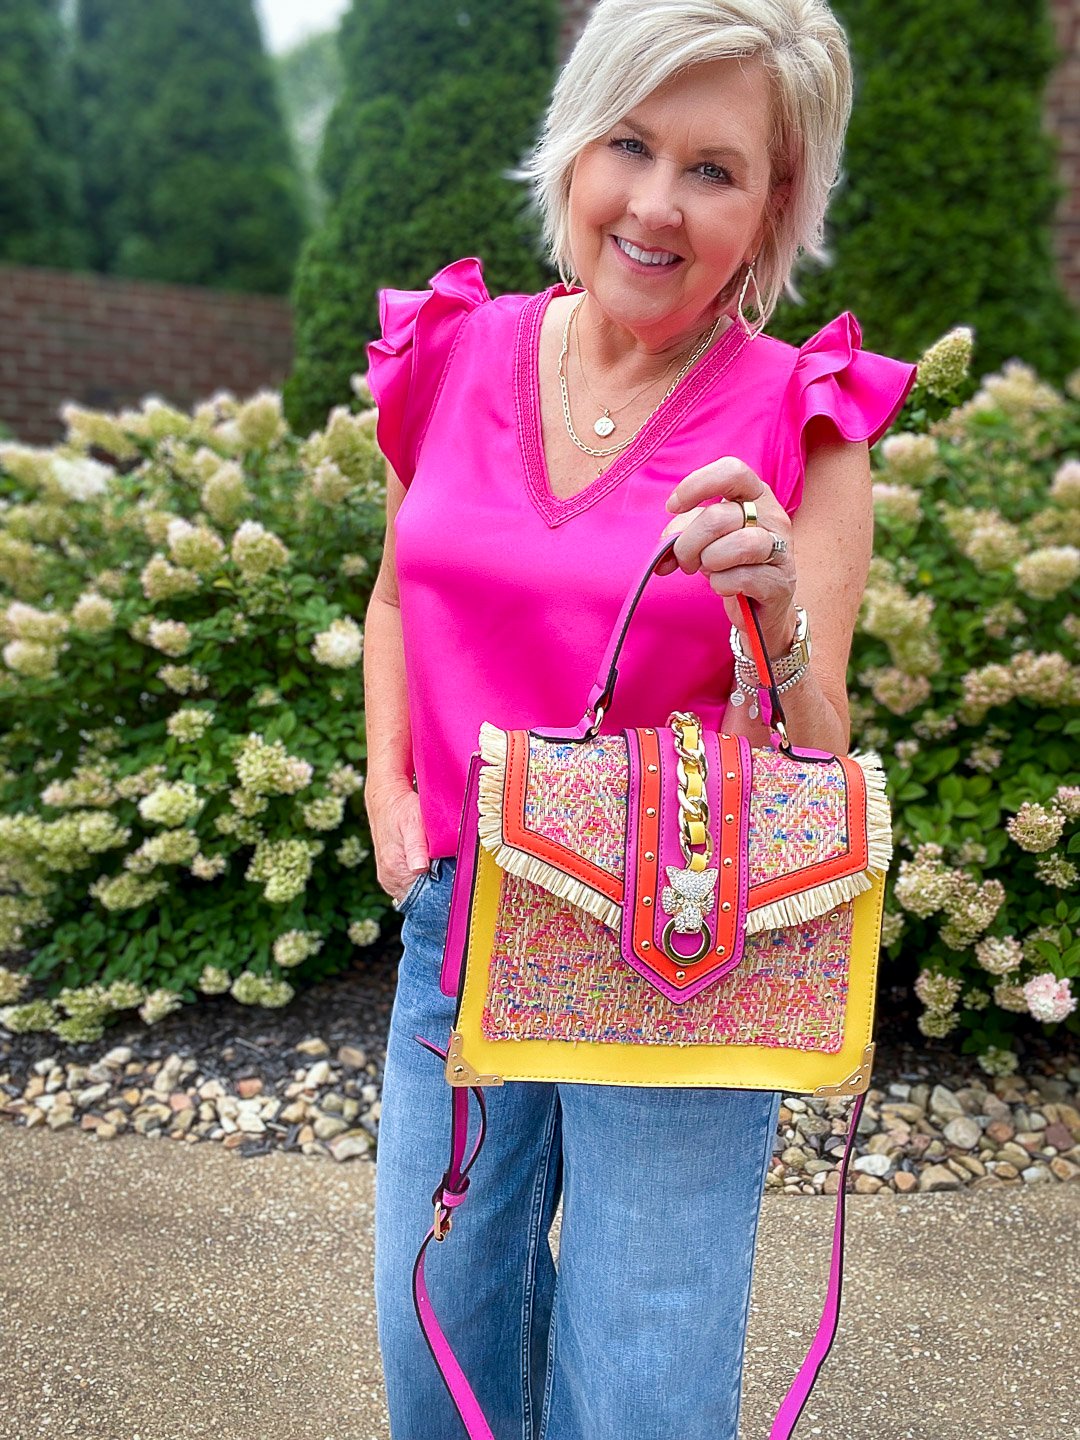 Over 40 Fashion Blogger, Tania Stephens is styling wide leg jeans with a pink ruffled top12